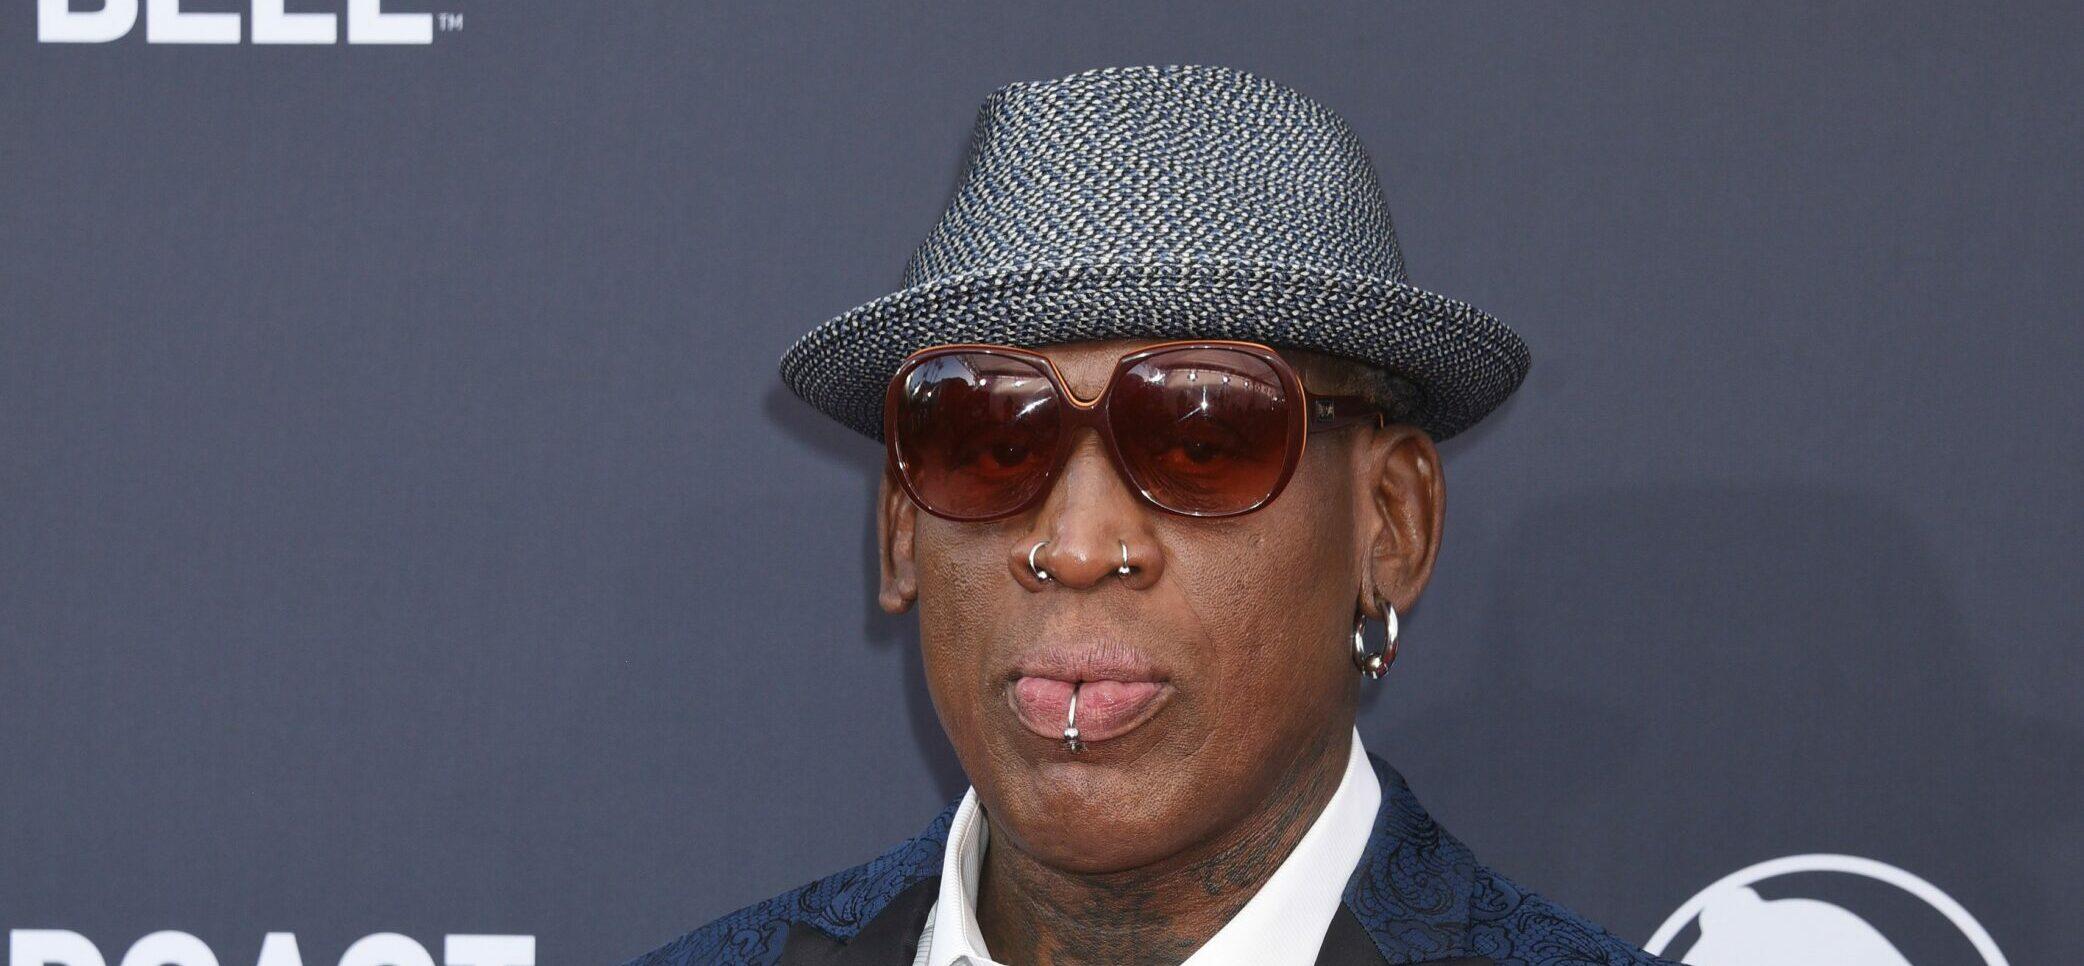 Dennis Rodman, 'The Comedy Central Roast of Bruce Willis'